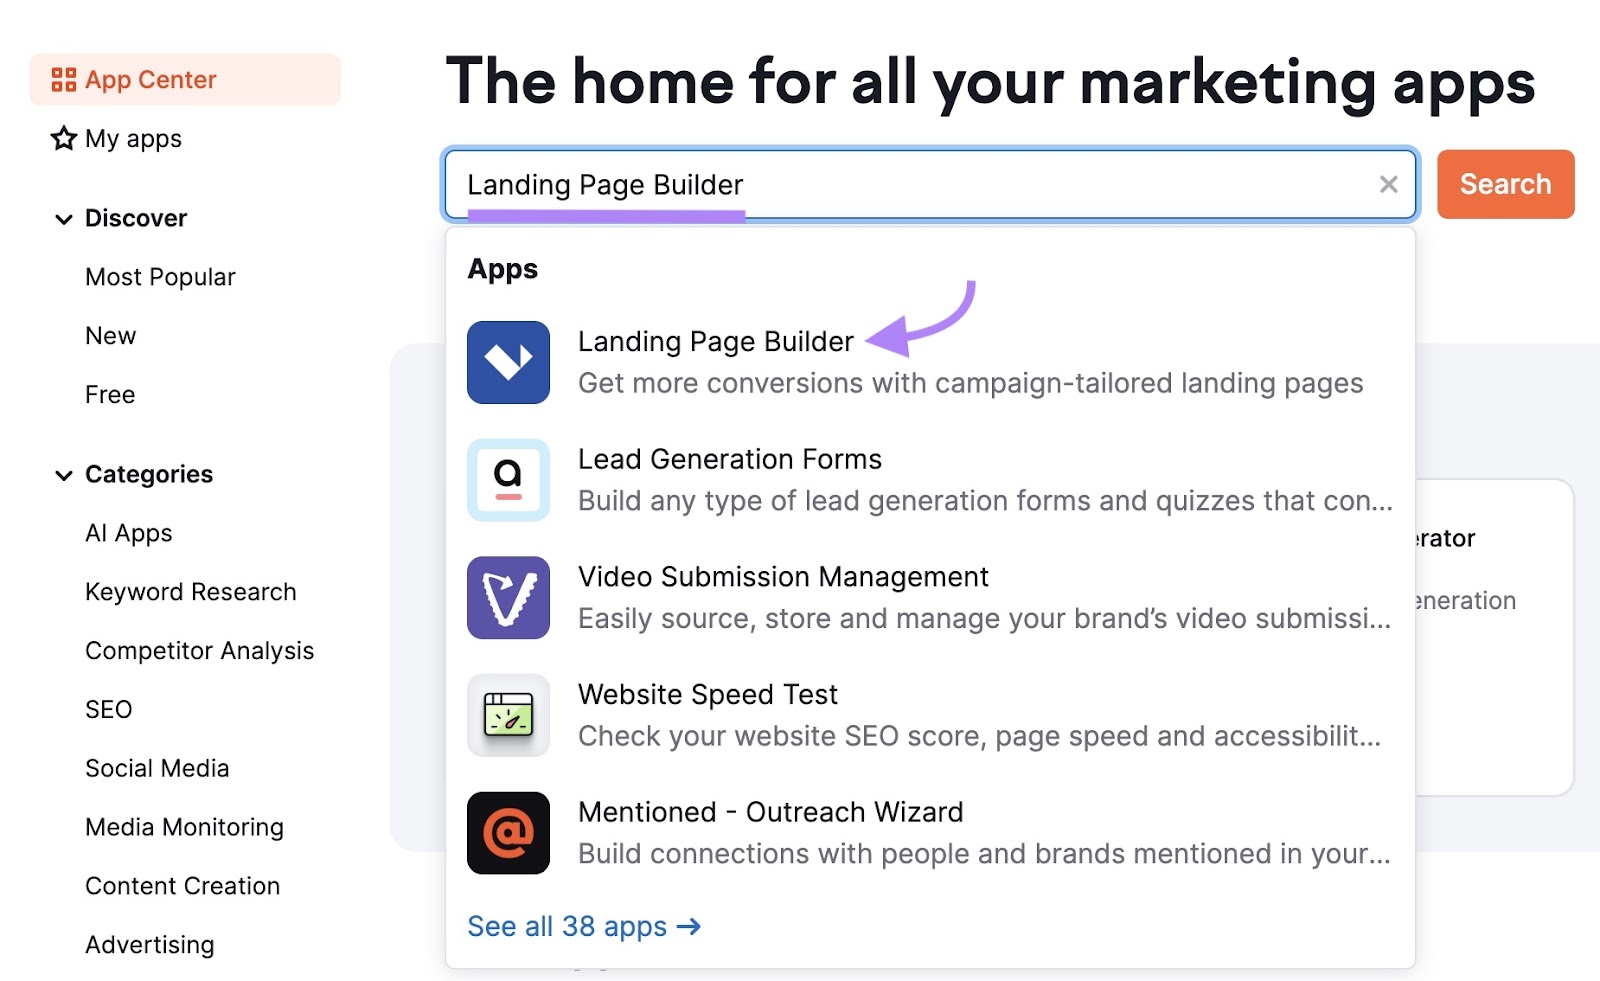 Semrush App Center home with “Landing Page Builder” entered in the search box and the same app highlighted in the drop-down